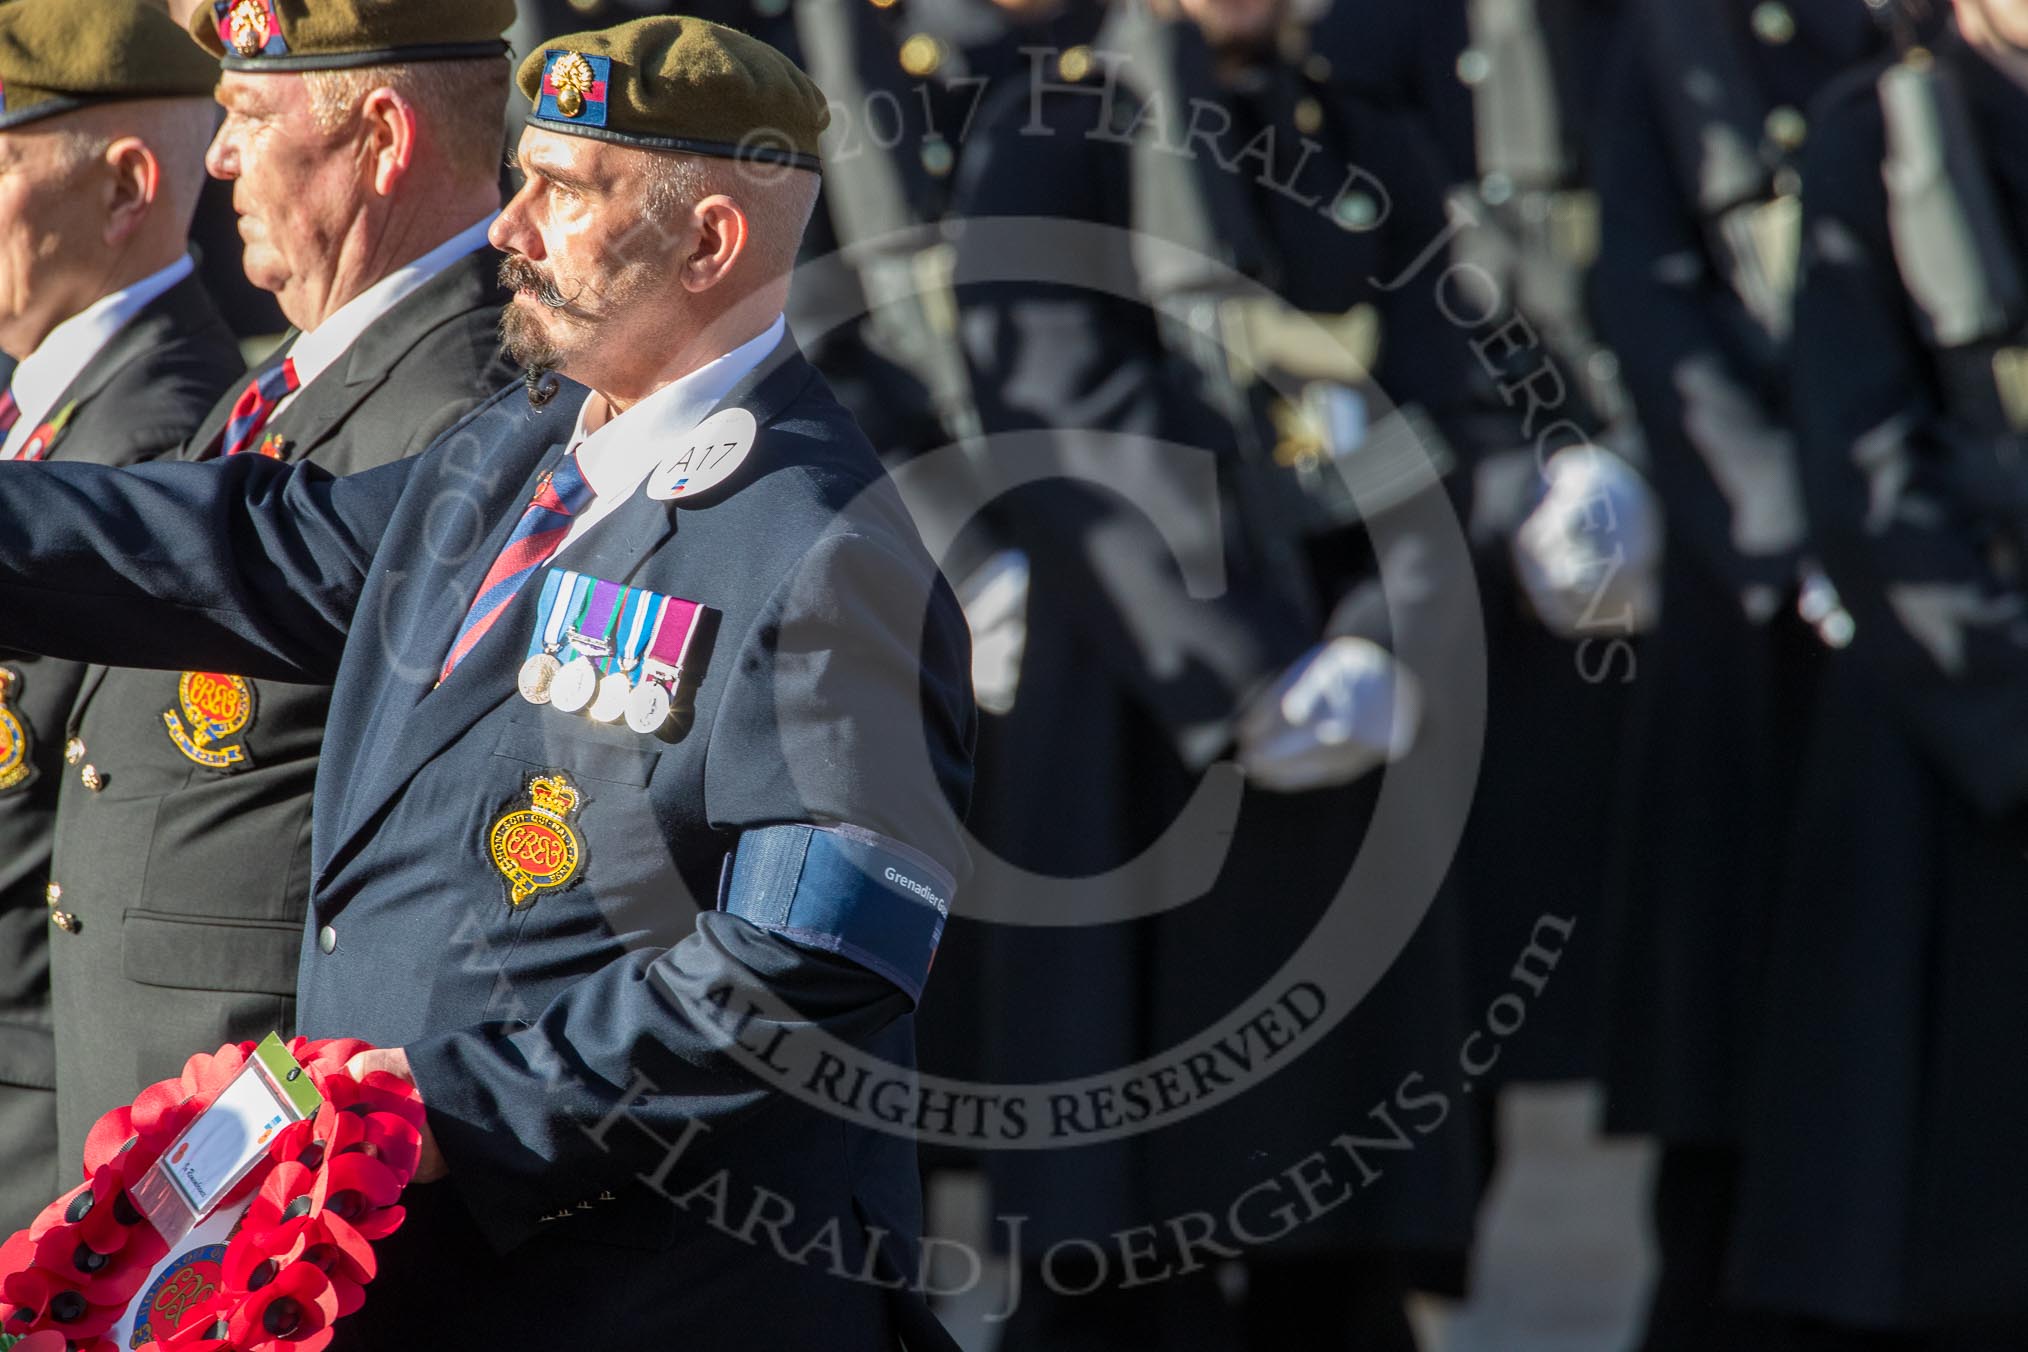 Grenadier Guards Association (Group A17, 4 members) during the Royal British Legion March Past on Remembrance Sunday at the Cenotaph, Whitehall, Westminster, London, 11 November 2018, 11:58.